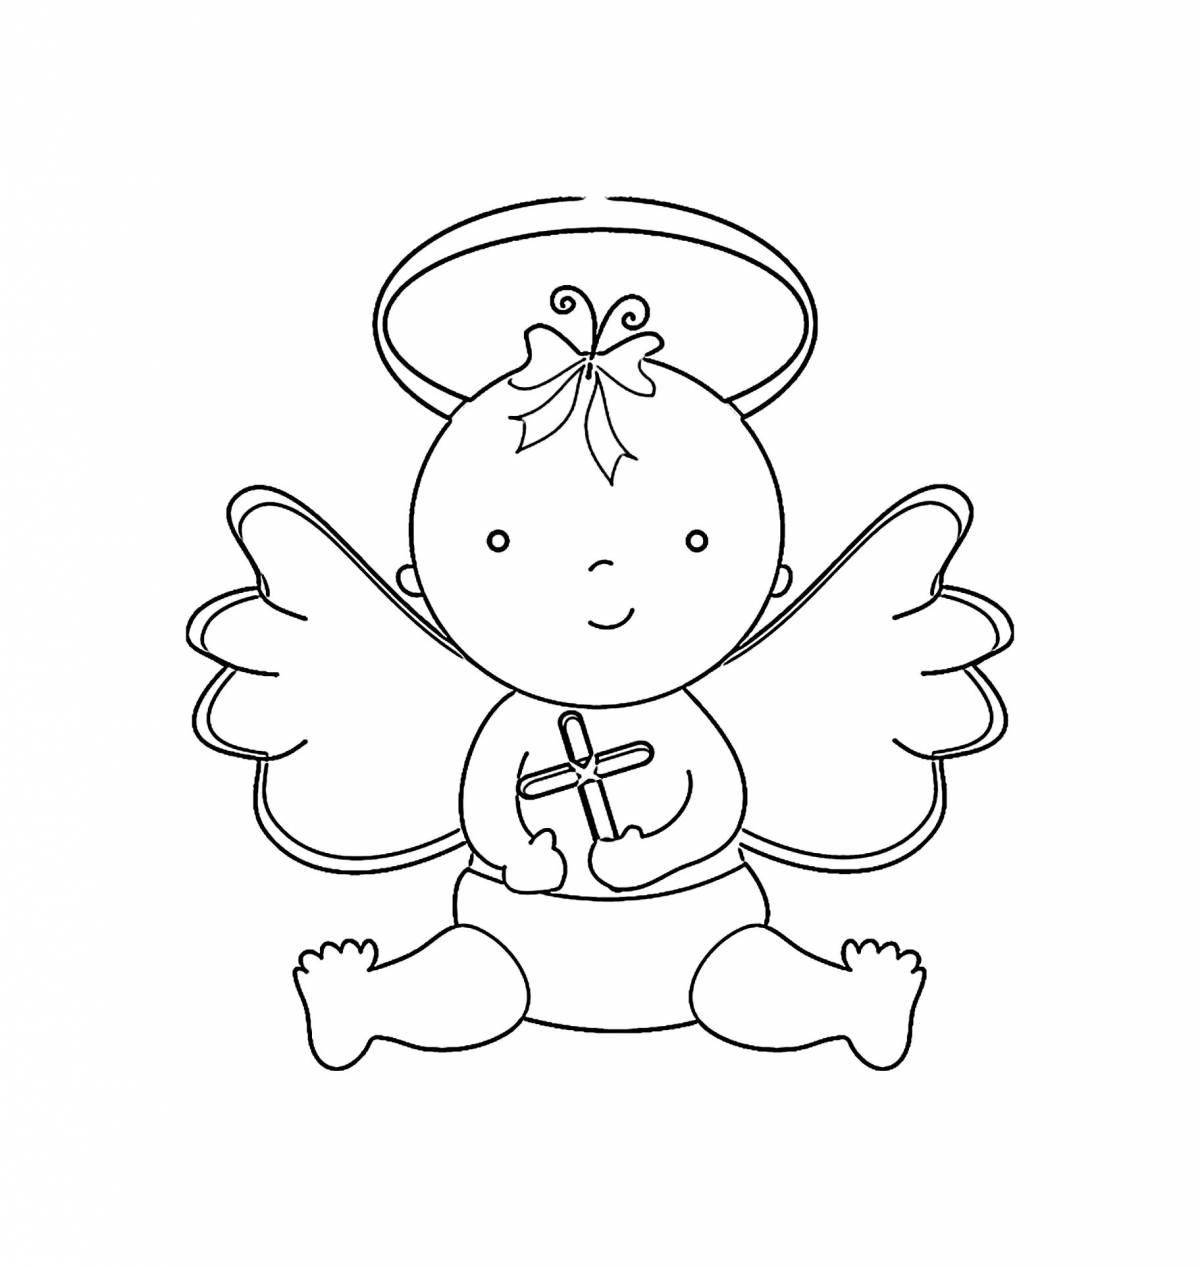 Great little angel coloring book